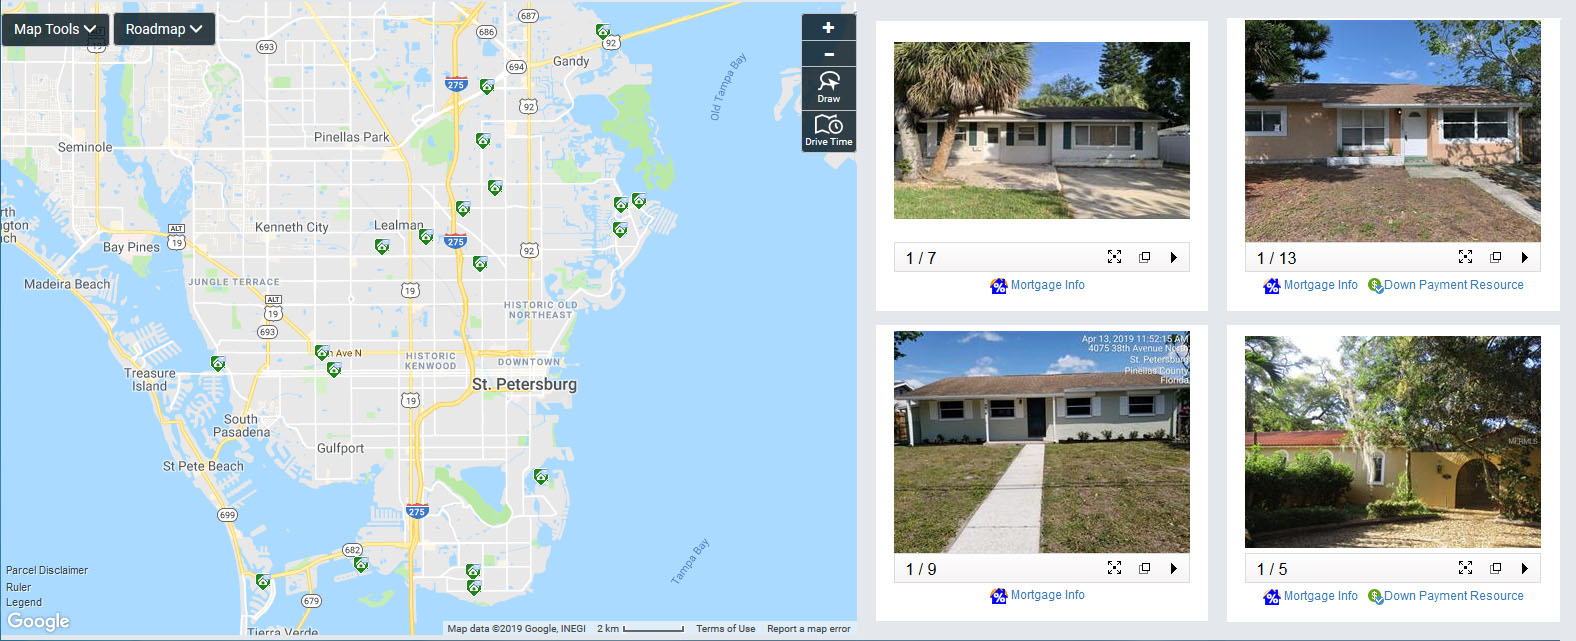 Foreclosures for Sale in St Petersburg [Bank-owned Listings]